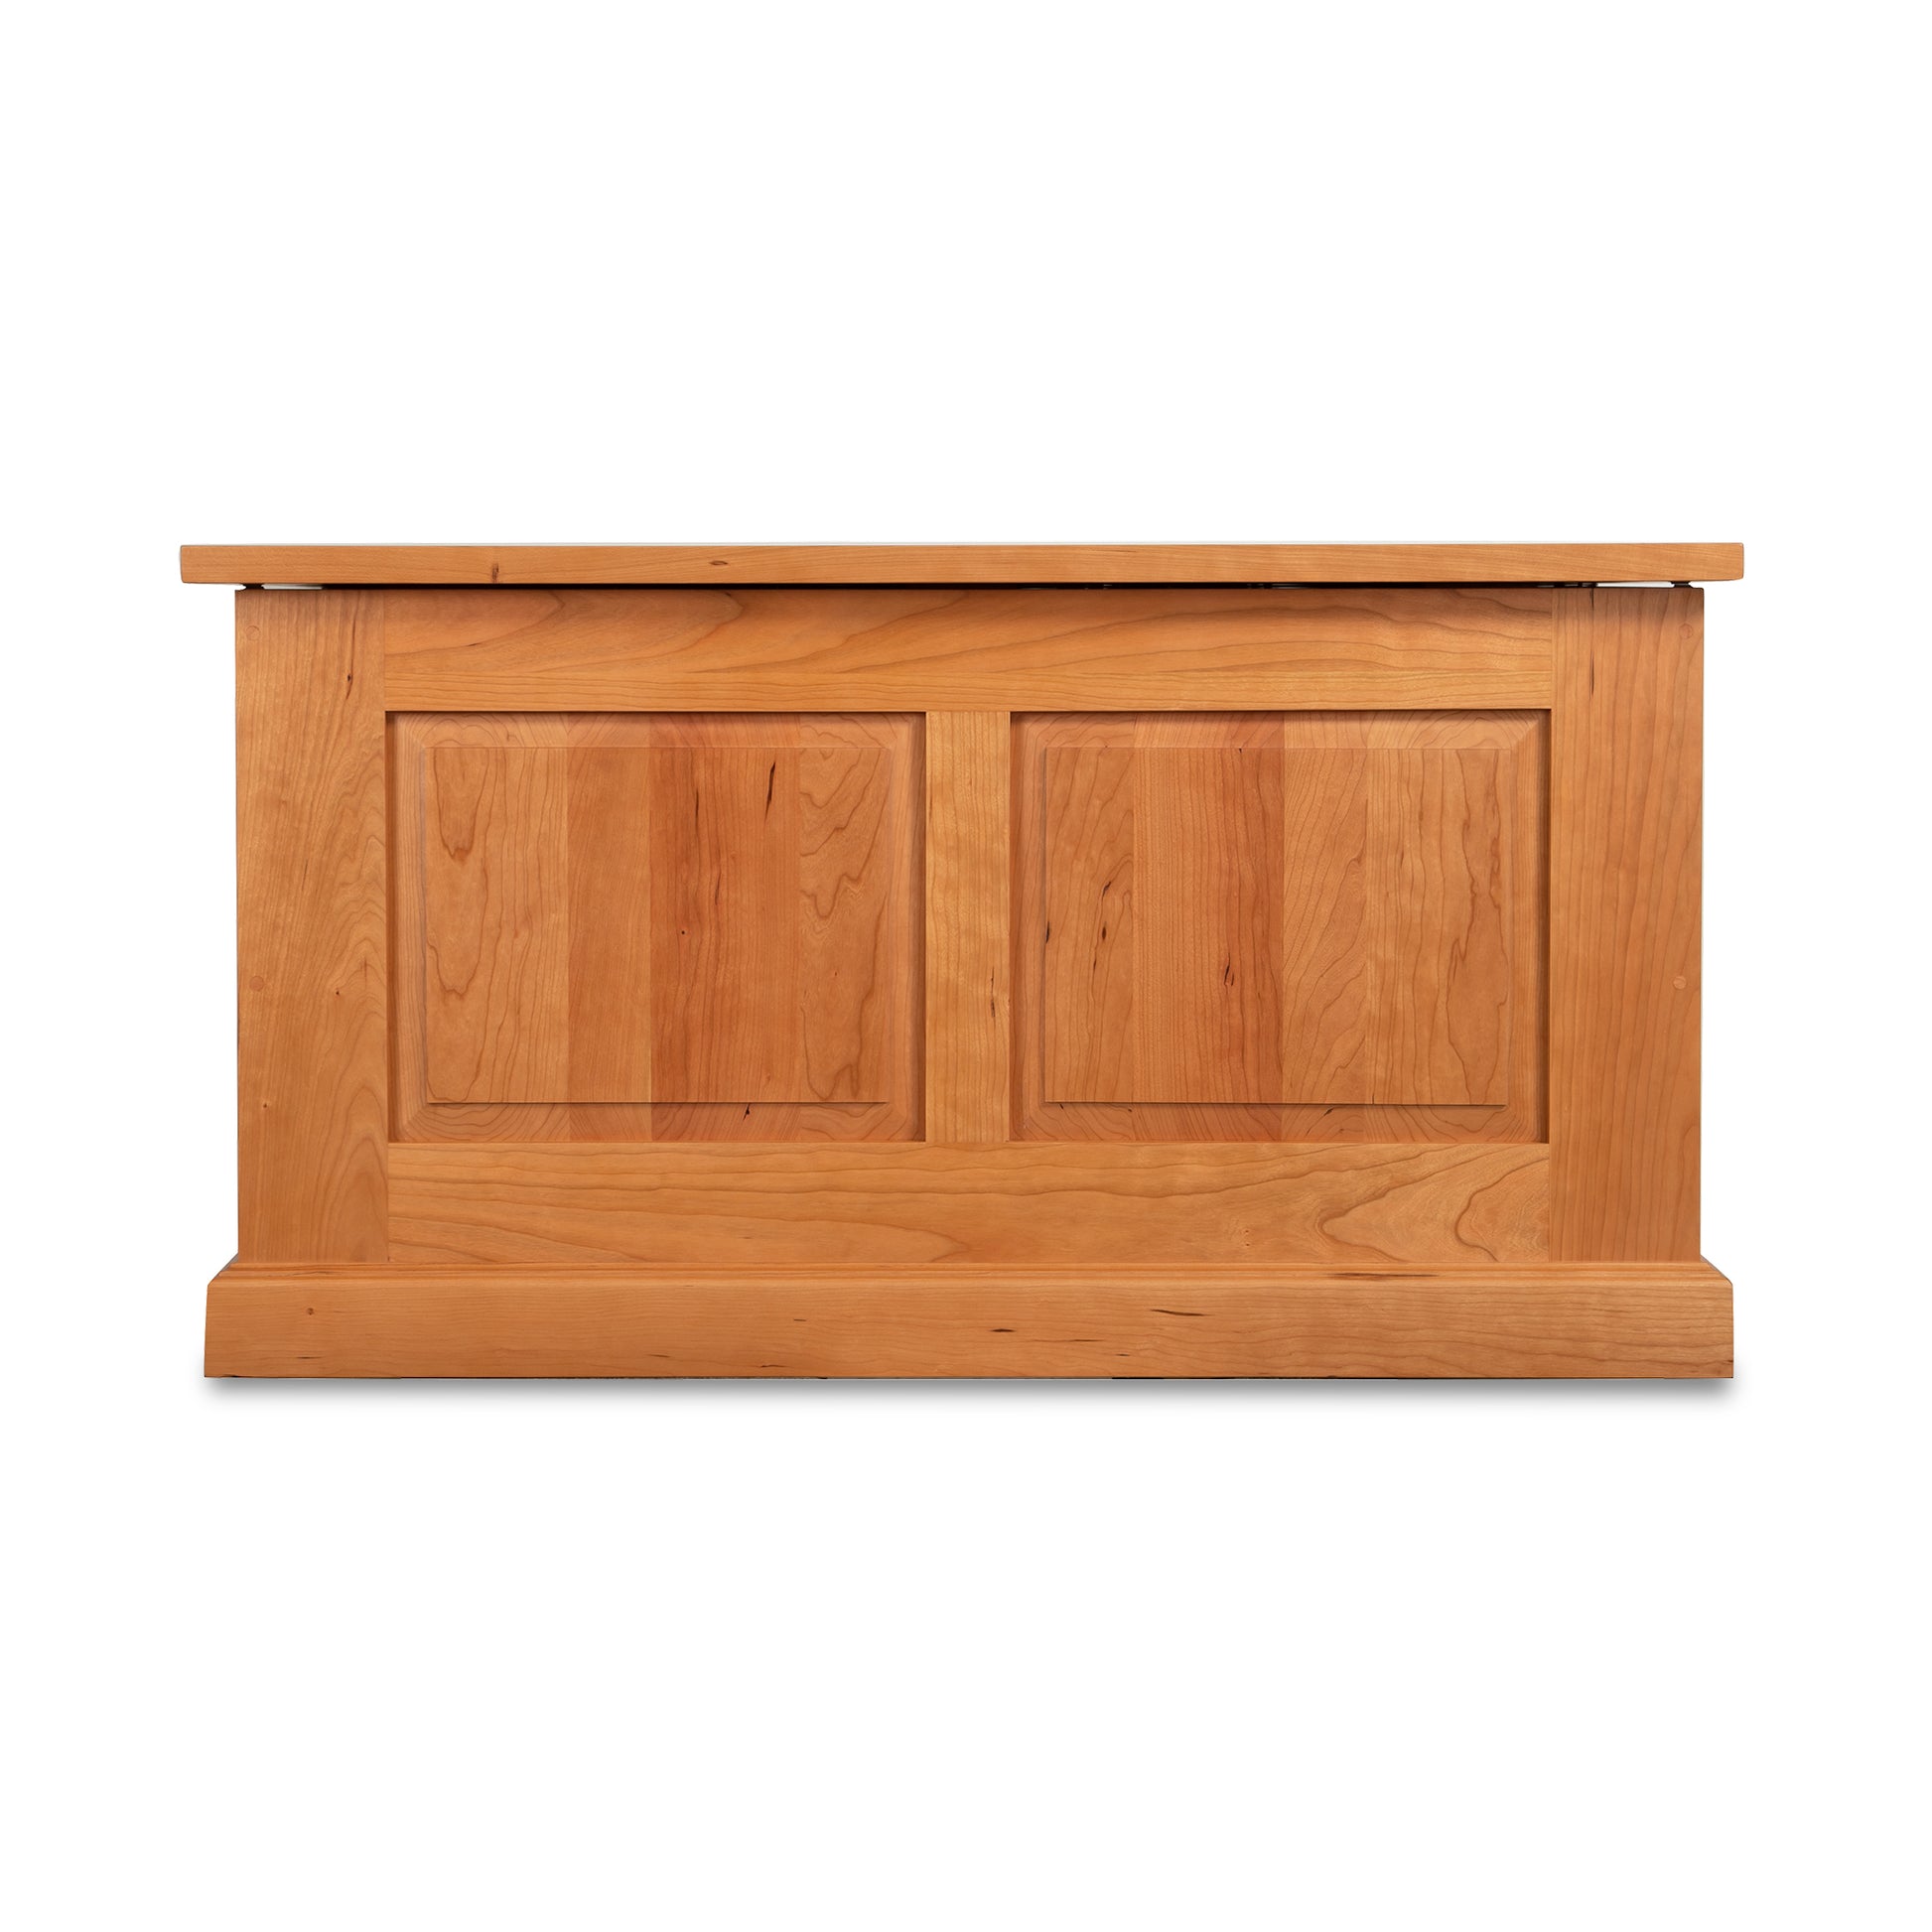 A sustainably harvested New England Shaker Blanket Box with two doors on it, made from North American hardwoods by Lyndon Furniture.